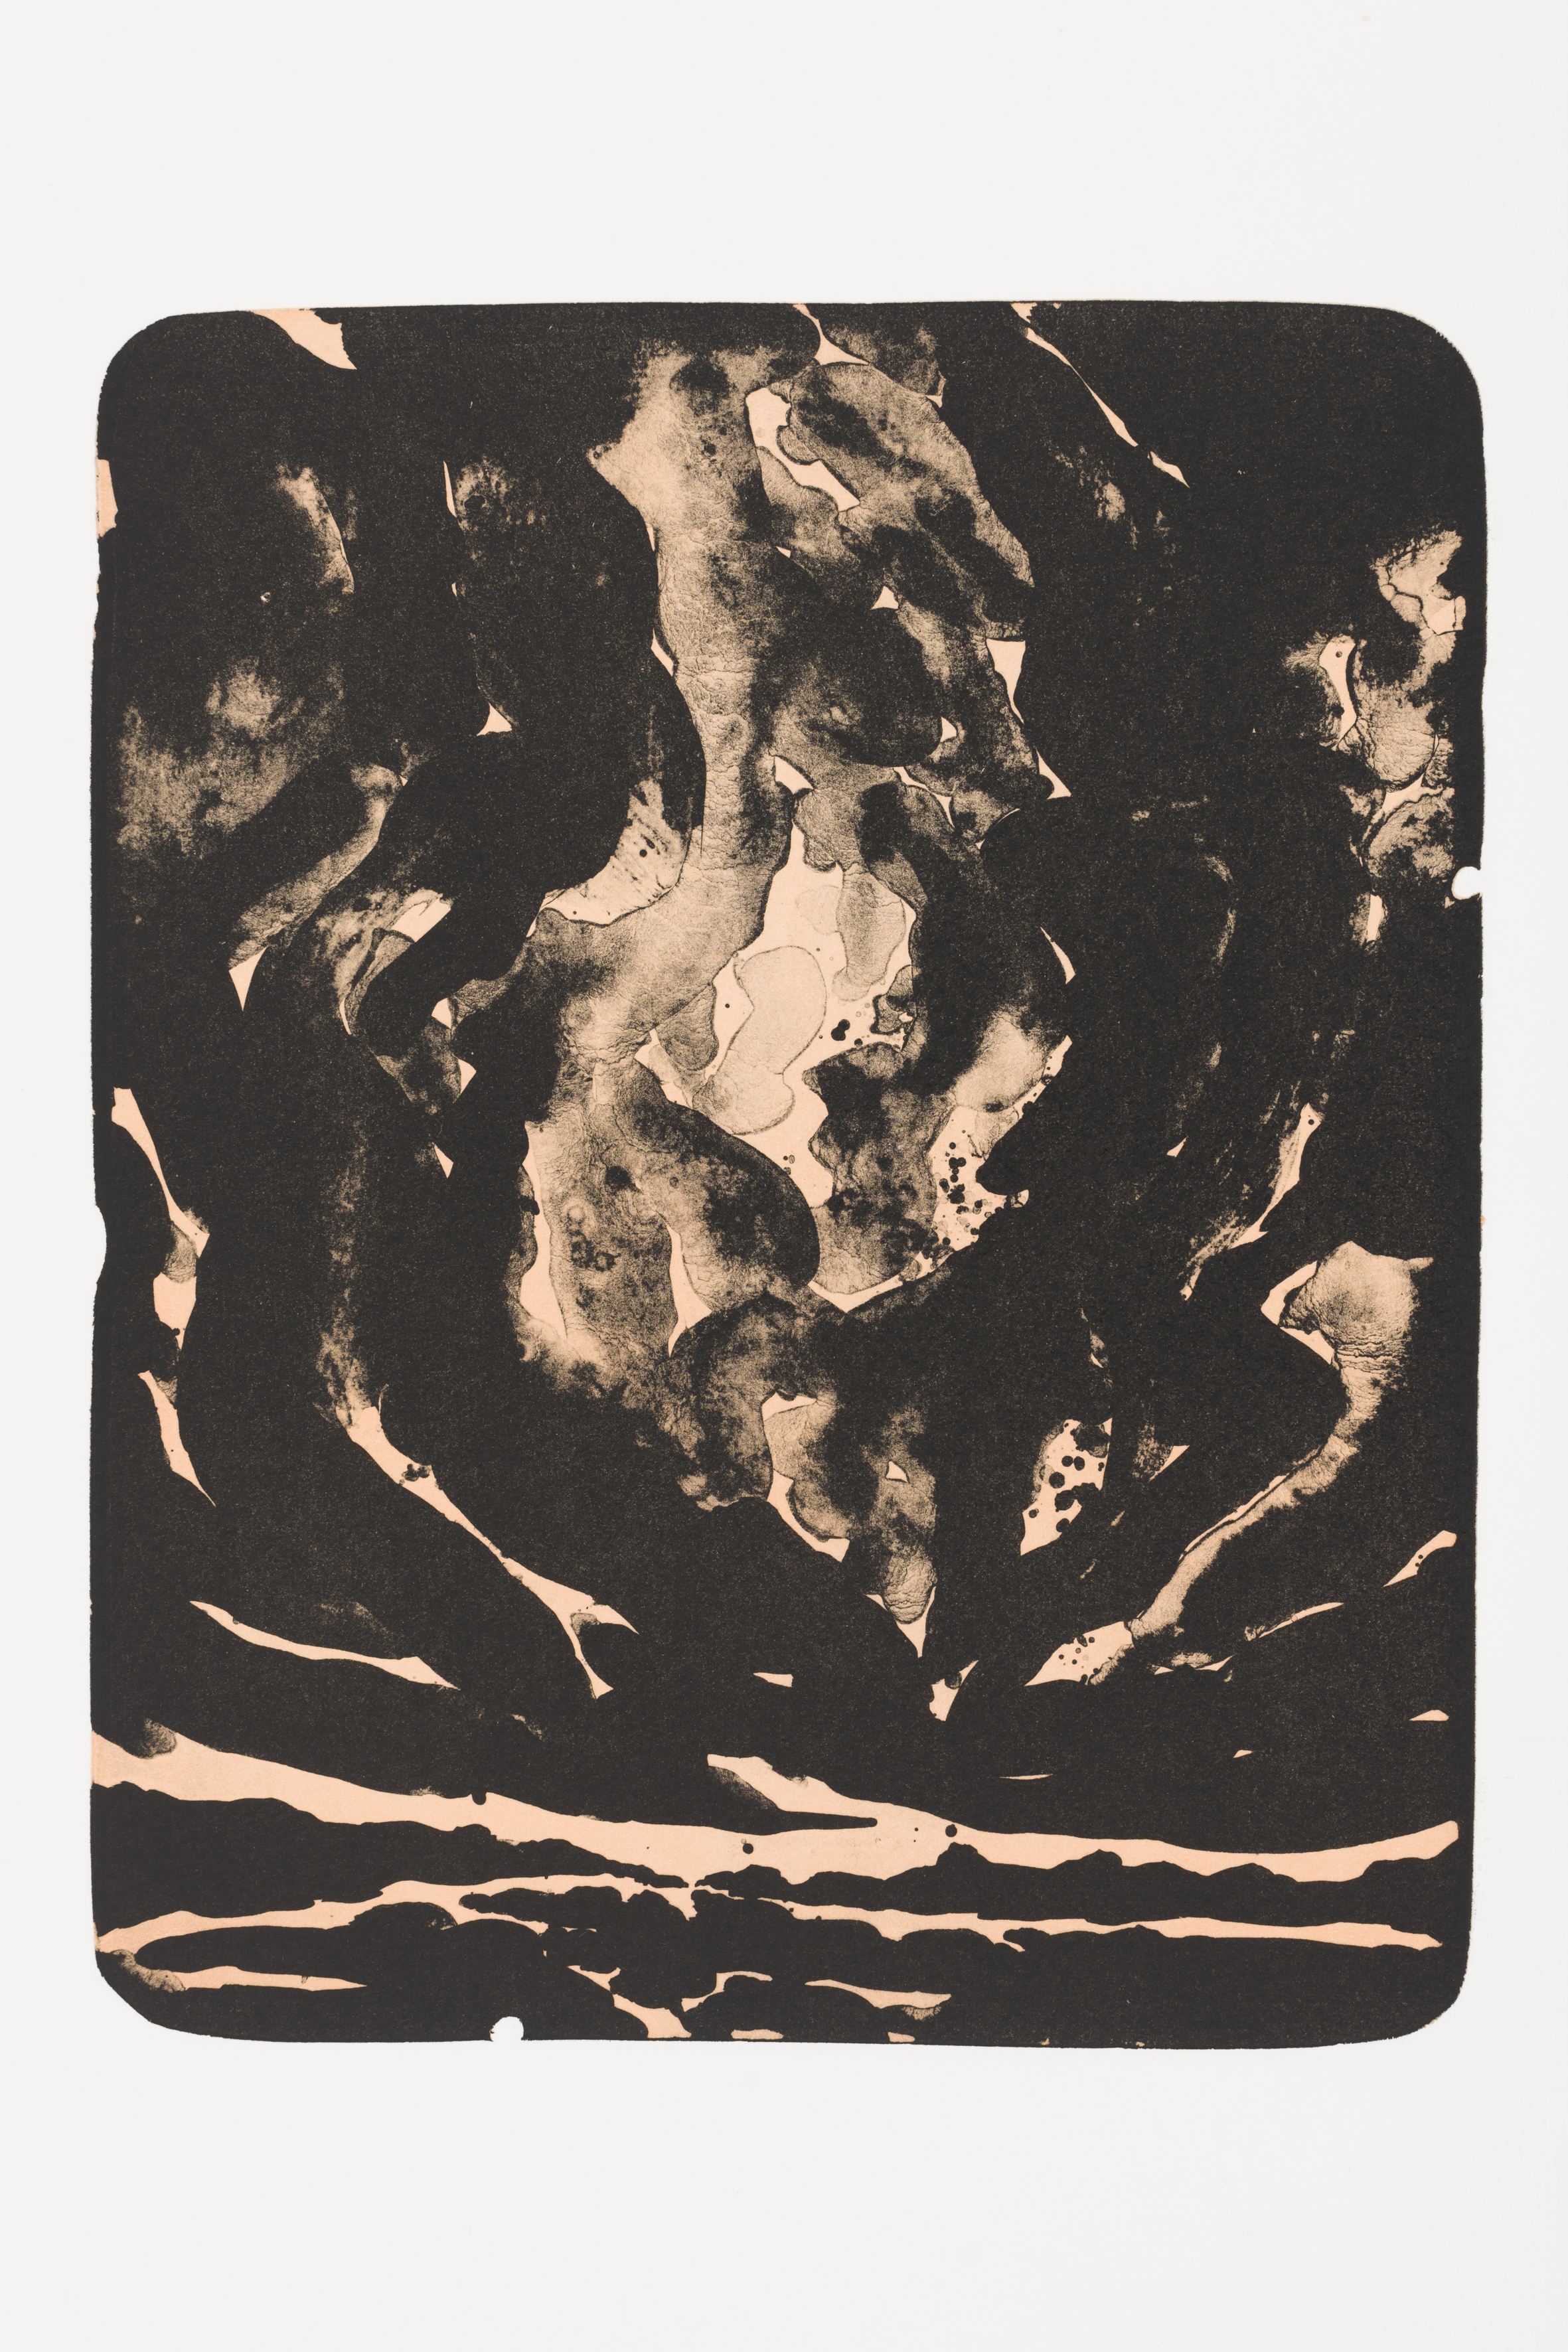 "Night Rises I" (2020), 42 x 30 cm. papersize, two color lithography (Printed at Druckwerkstatt Bethanien, Berlin (D) 2020)